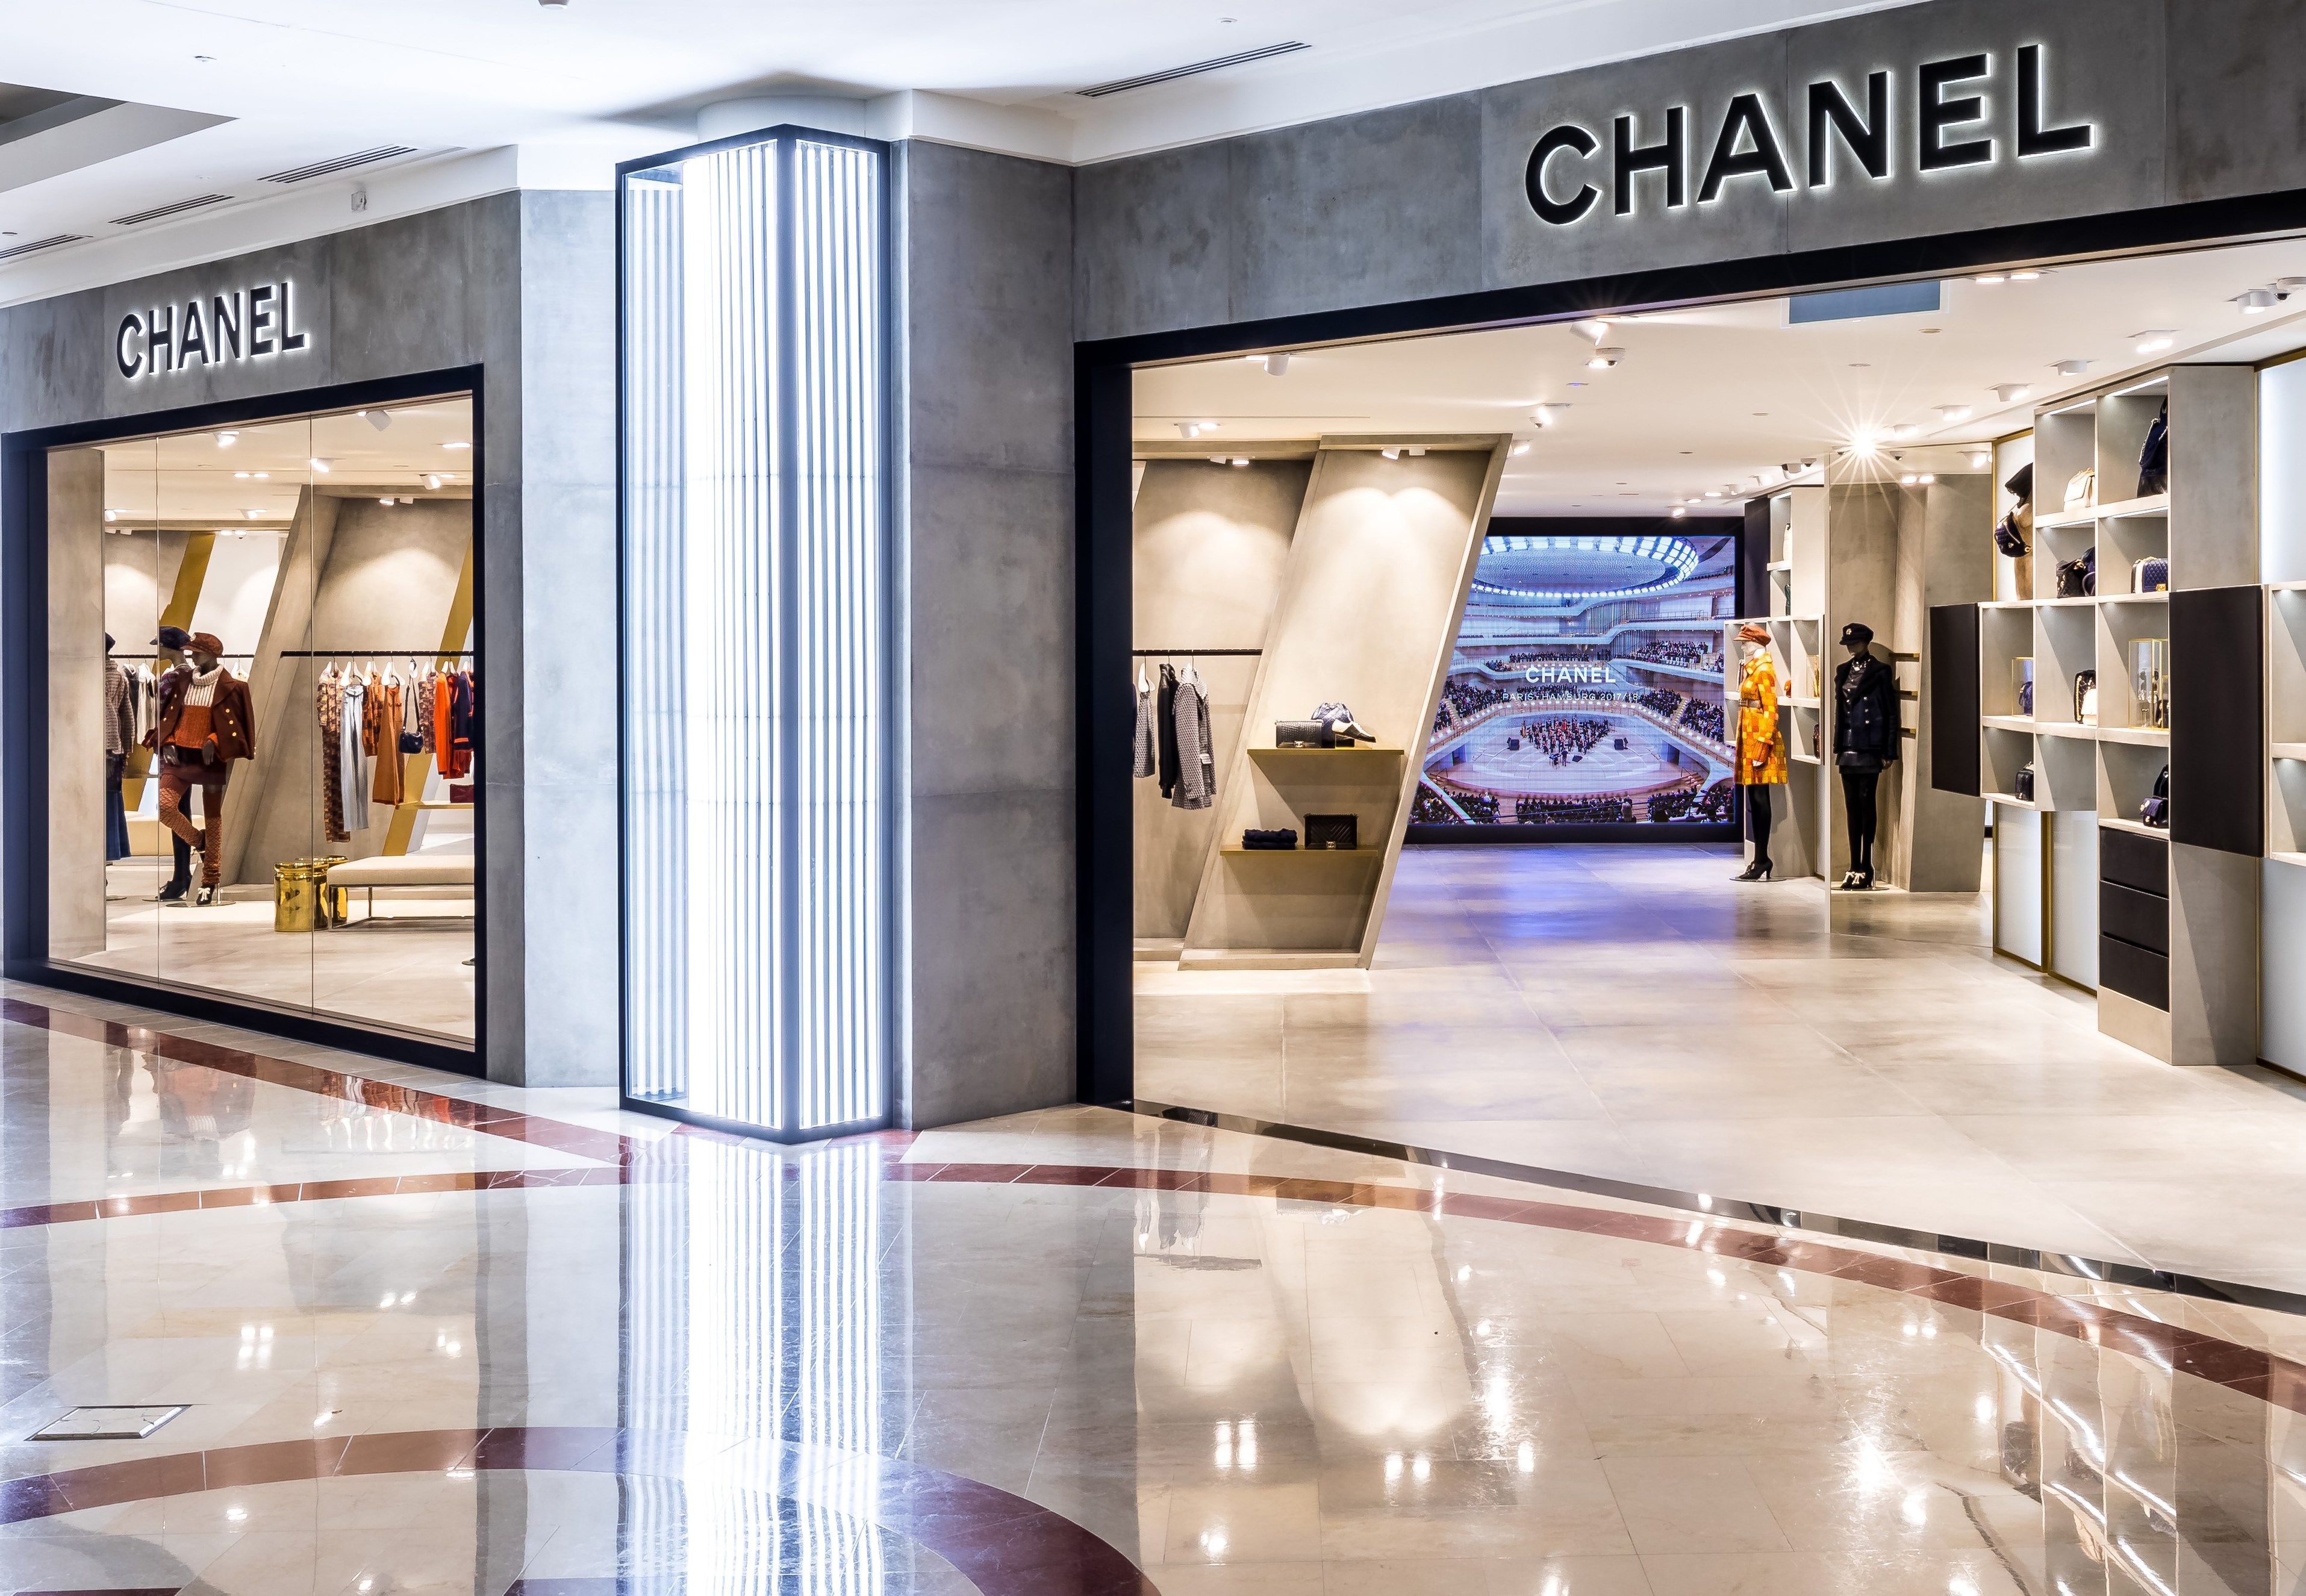 Chanel's Pop-Up Store Makes Its Mark In Malaysia